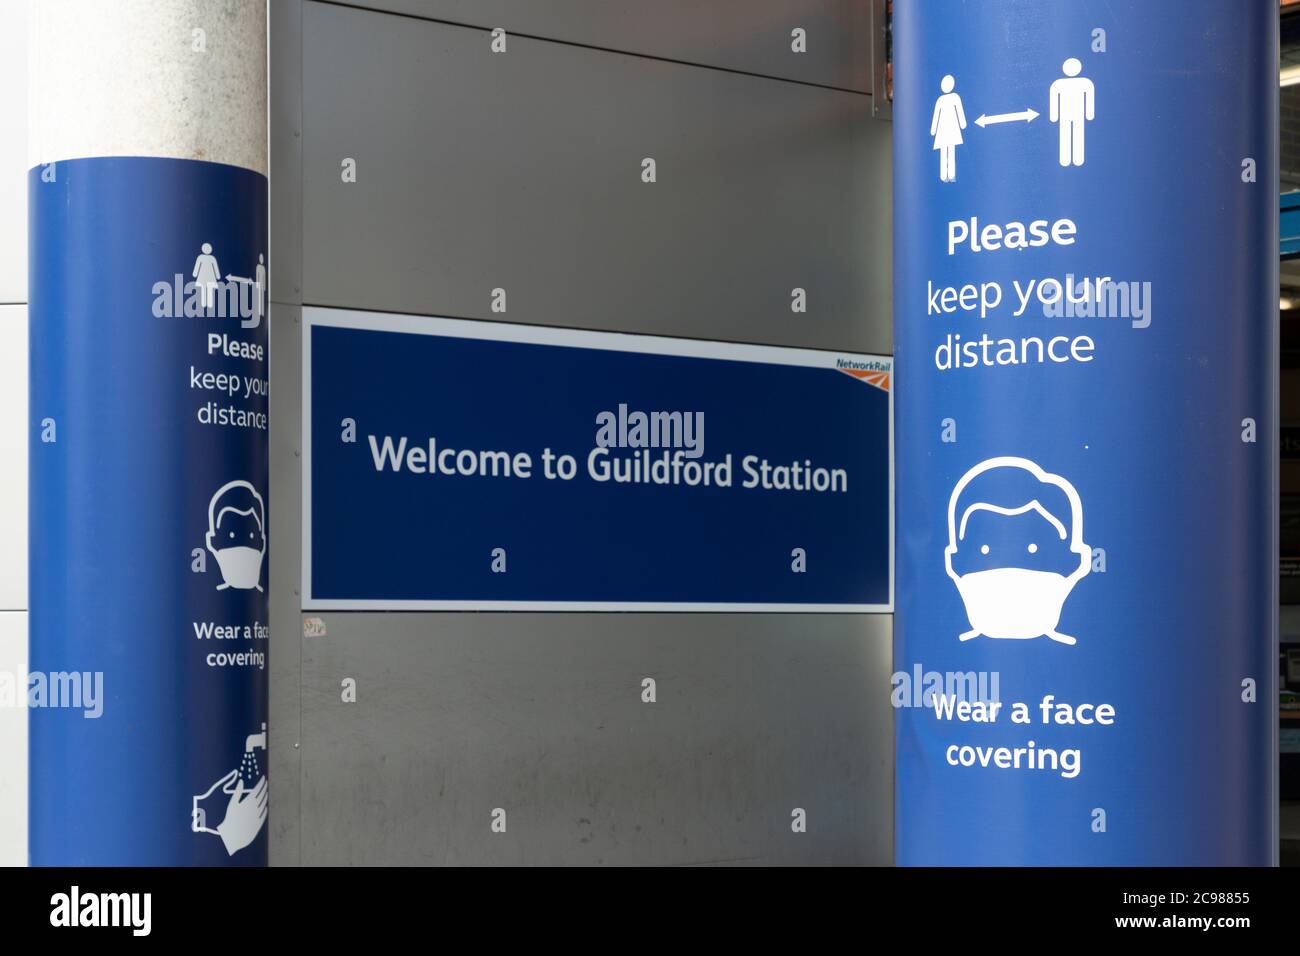 Entrance to Guildford train station showing COVID-19 signage, Surrey, England, 29 July 2020 Stock Photo